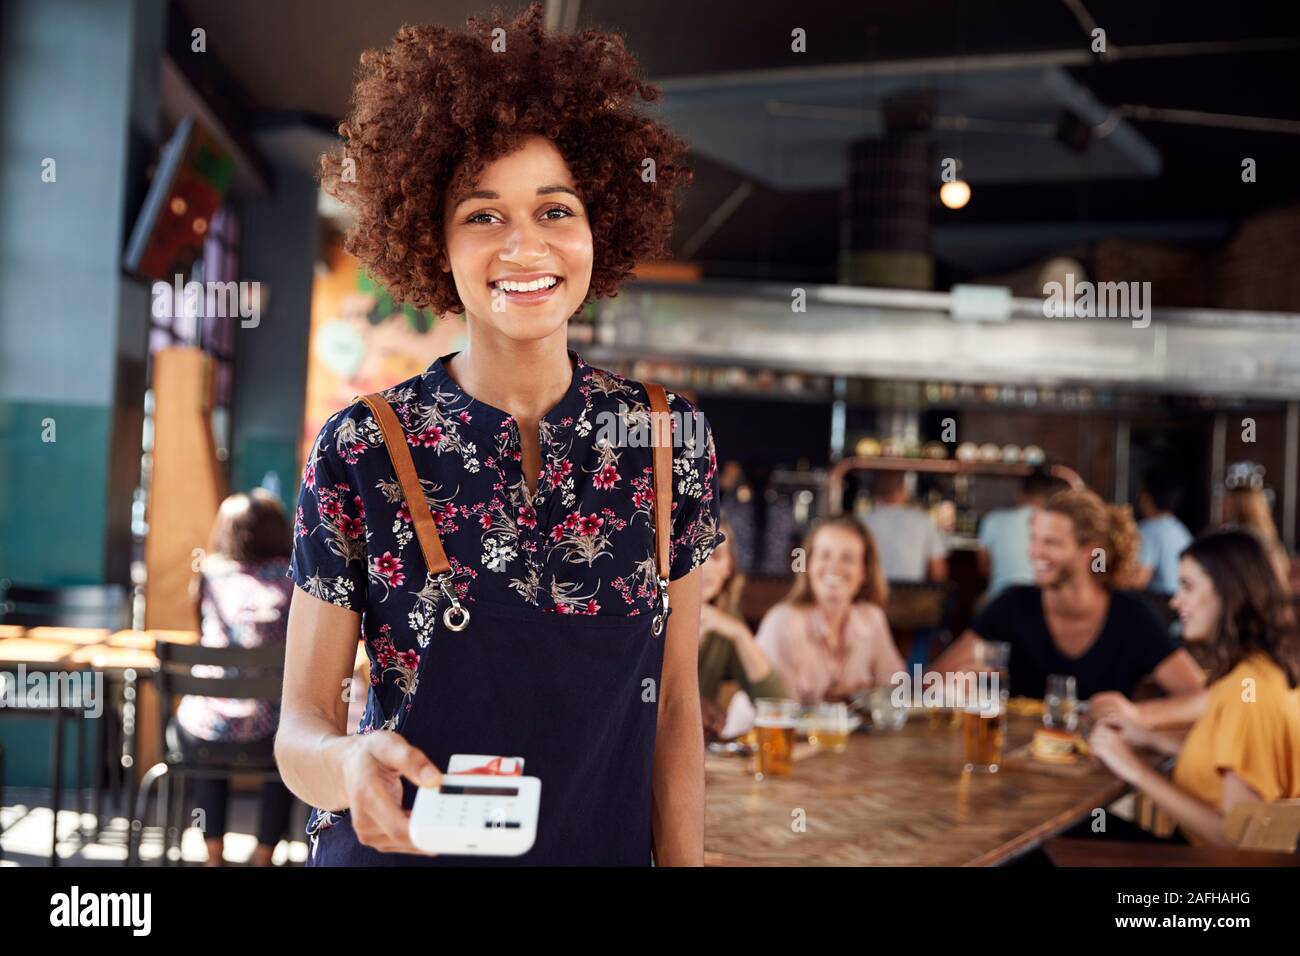 Portrait Of Waitress Holding Credit Card Payment Terminal In Busy Bar Restaurant Stock Photo